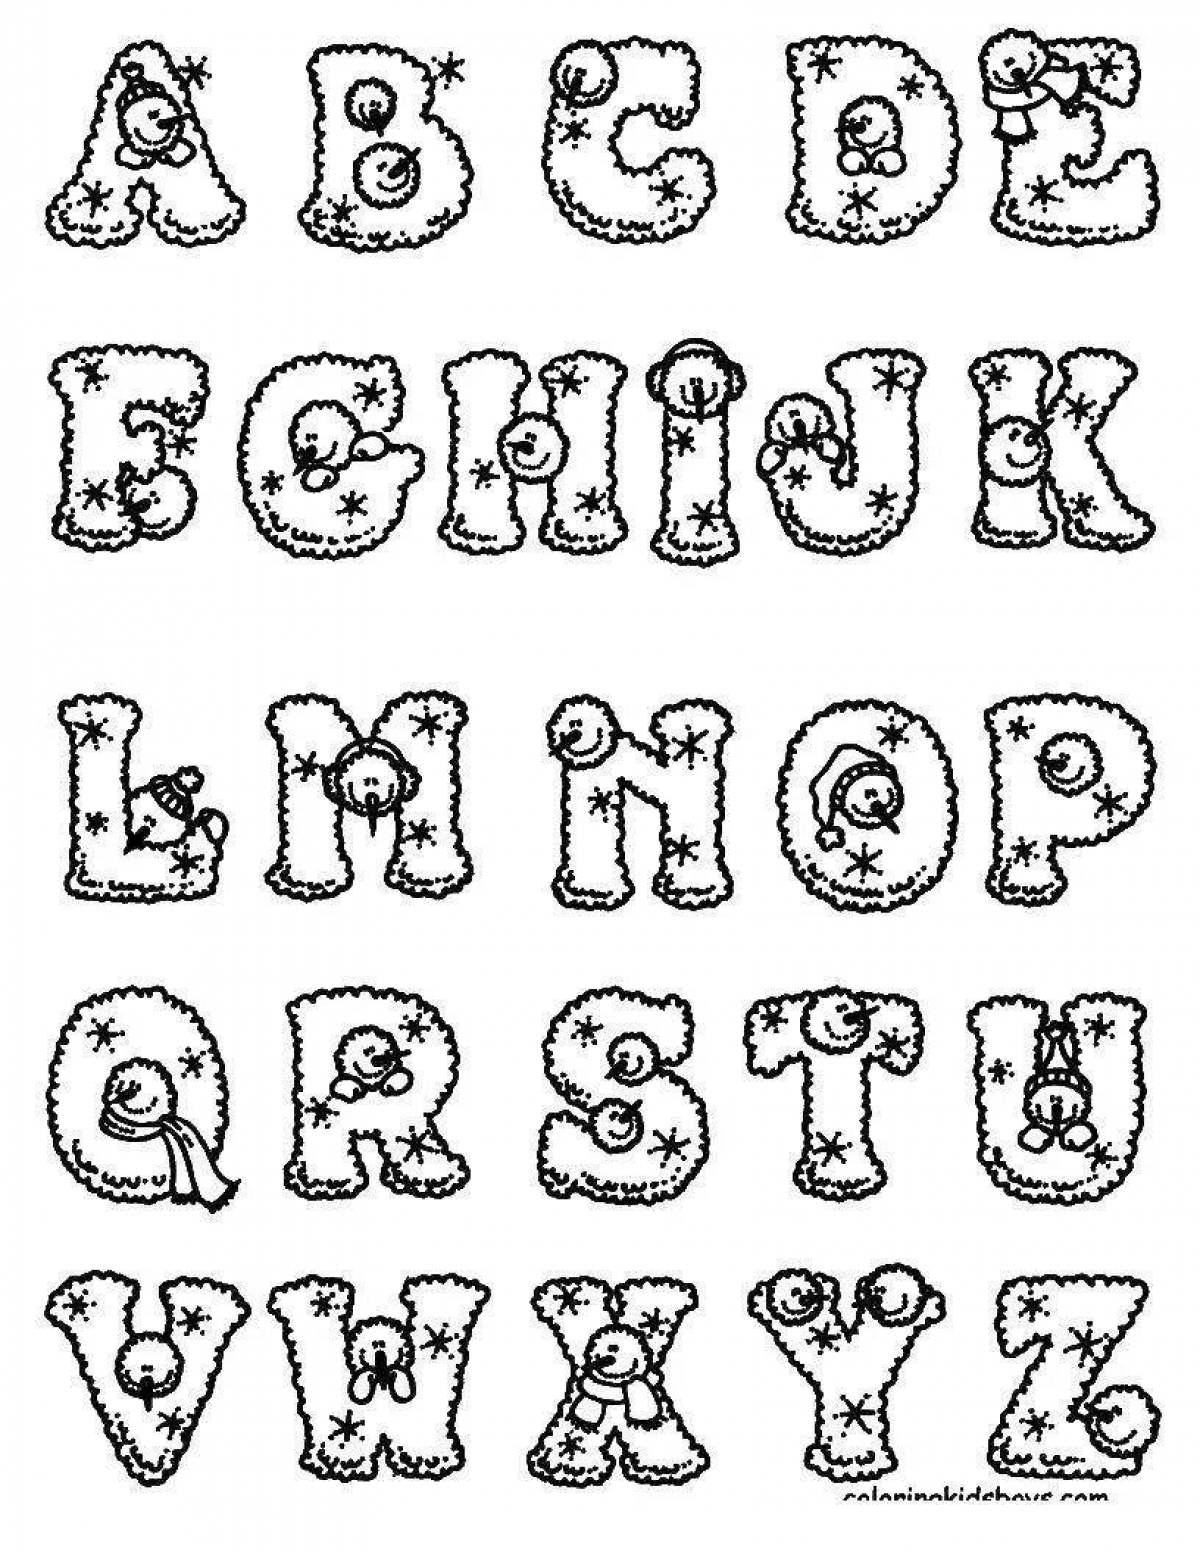 Great coloring book with nice font